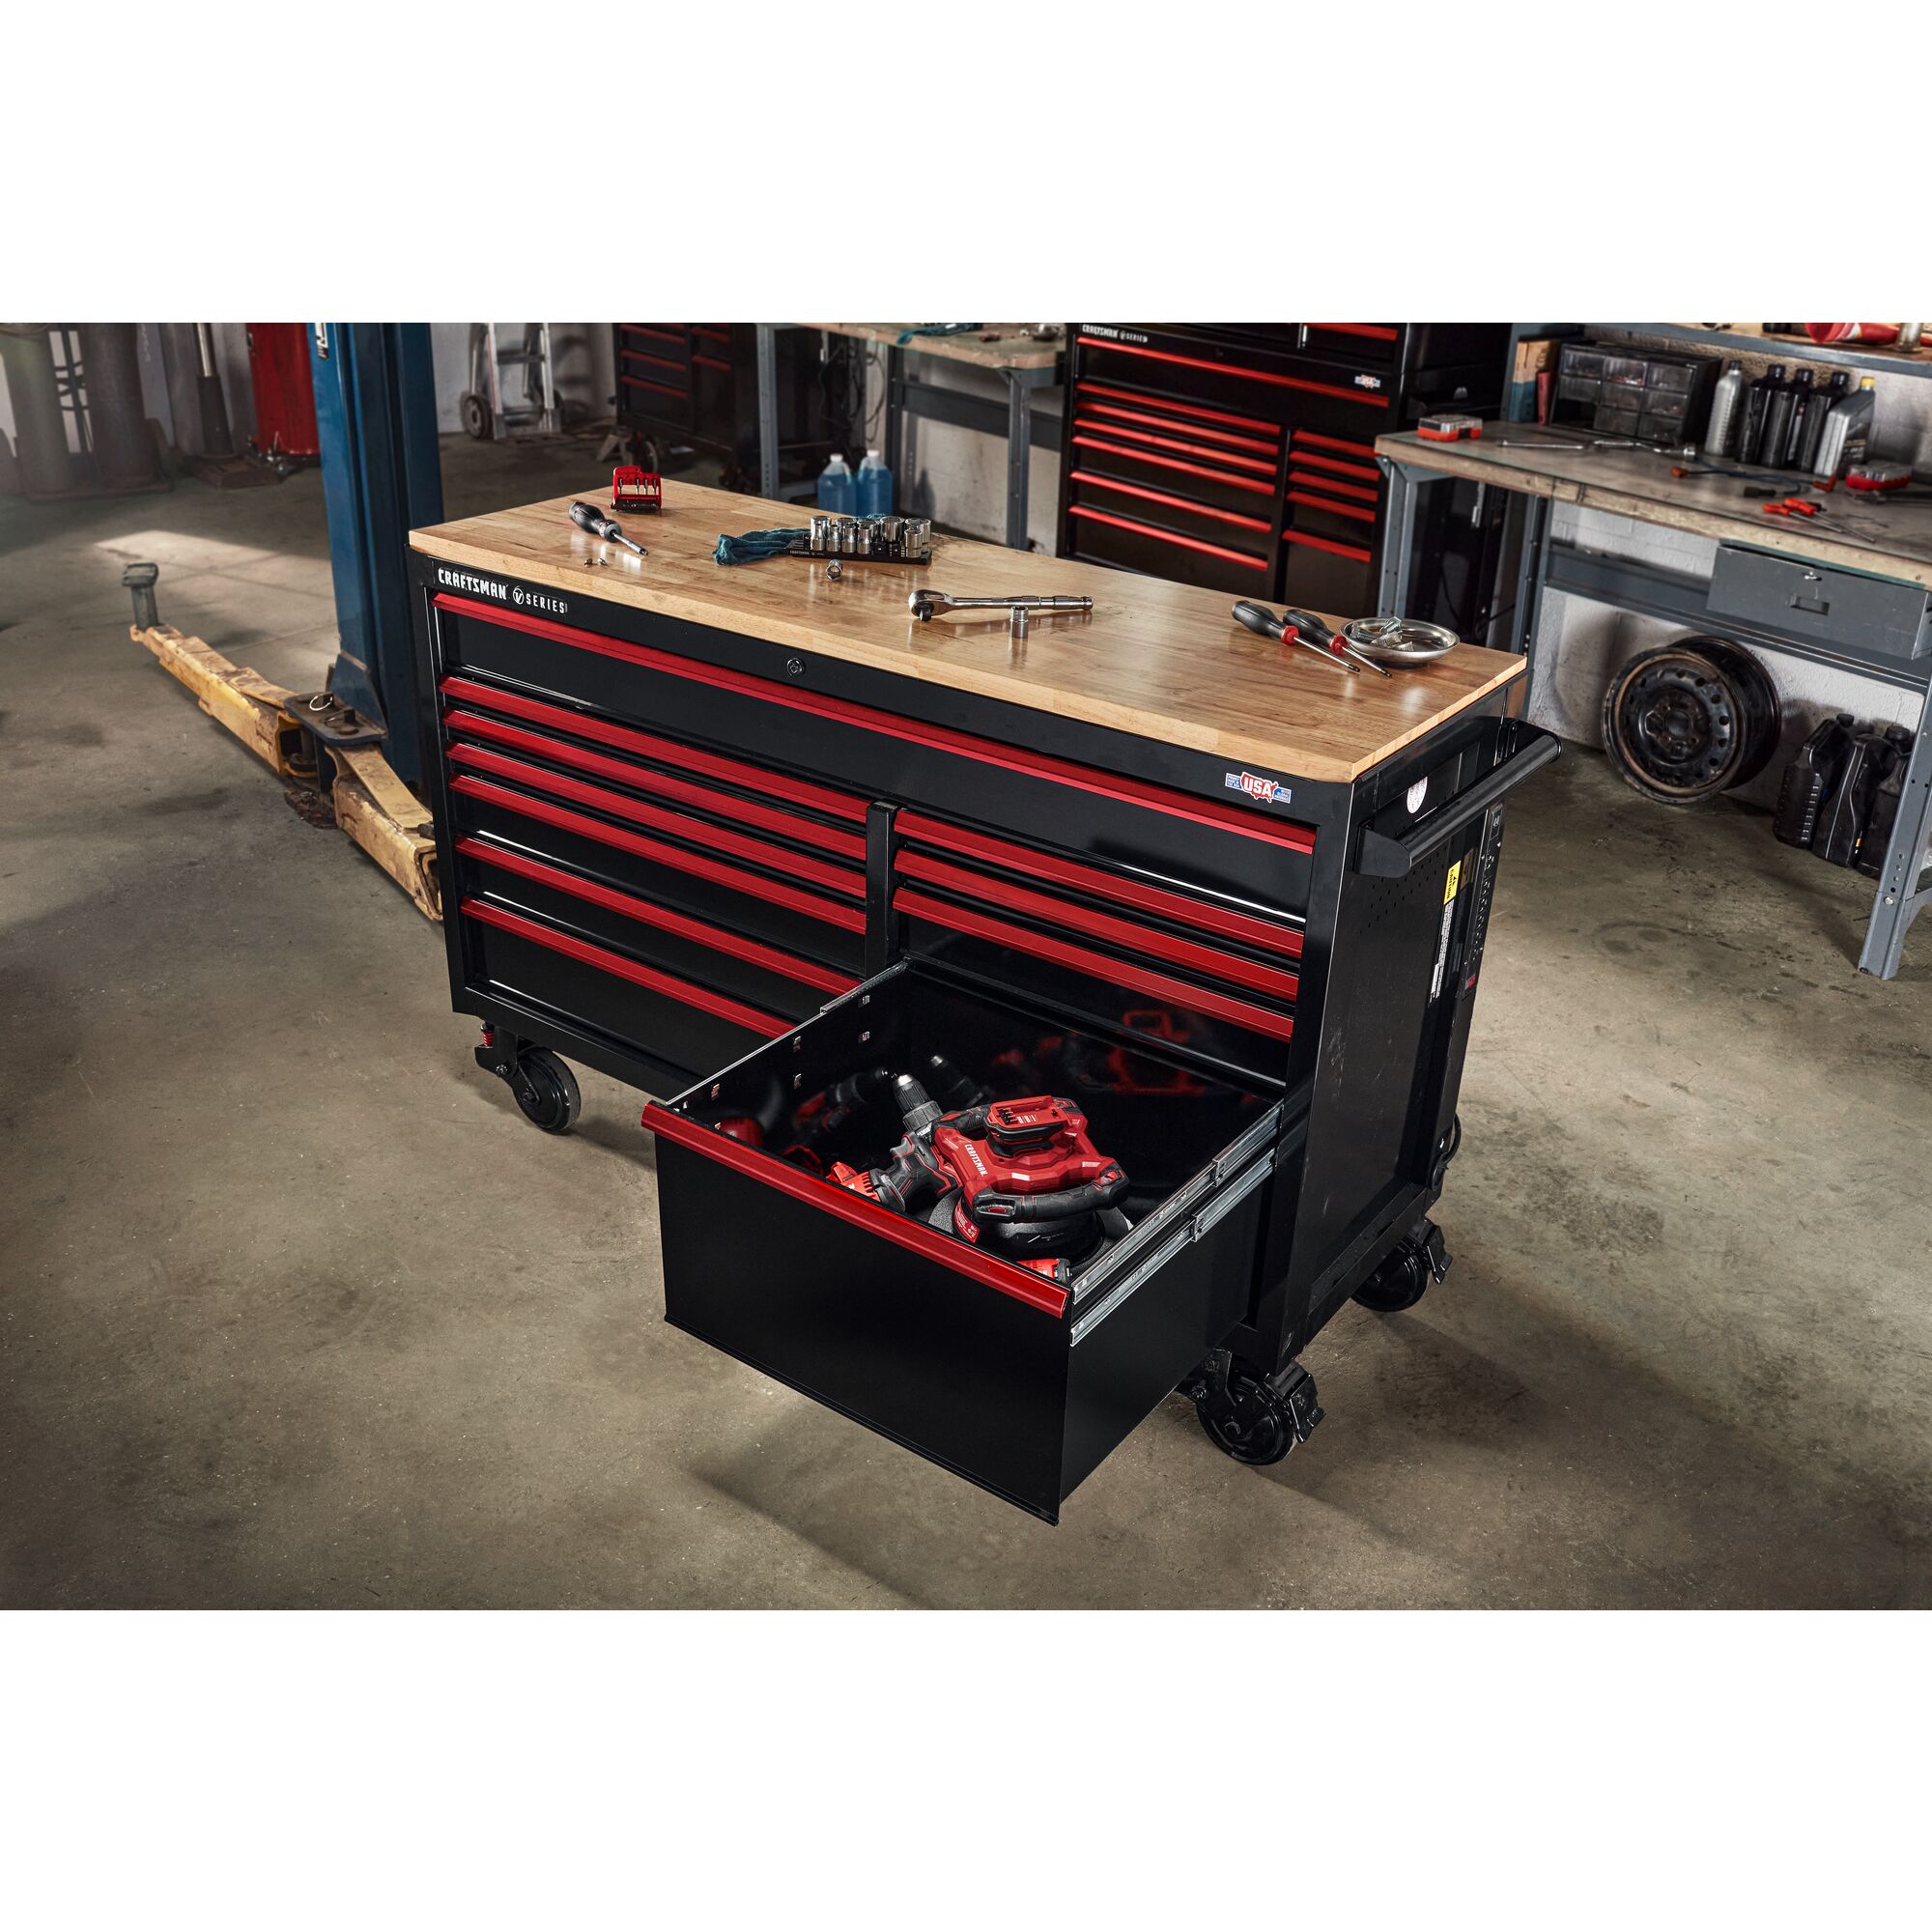 CRAFTSMAN V-Series™ Workstation featured in automotive shop filled with CRAFTSMAN tools